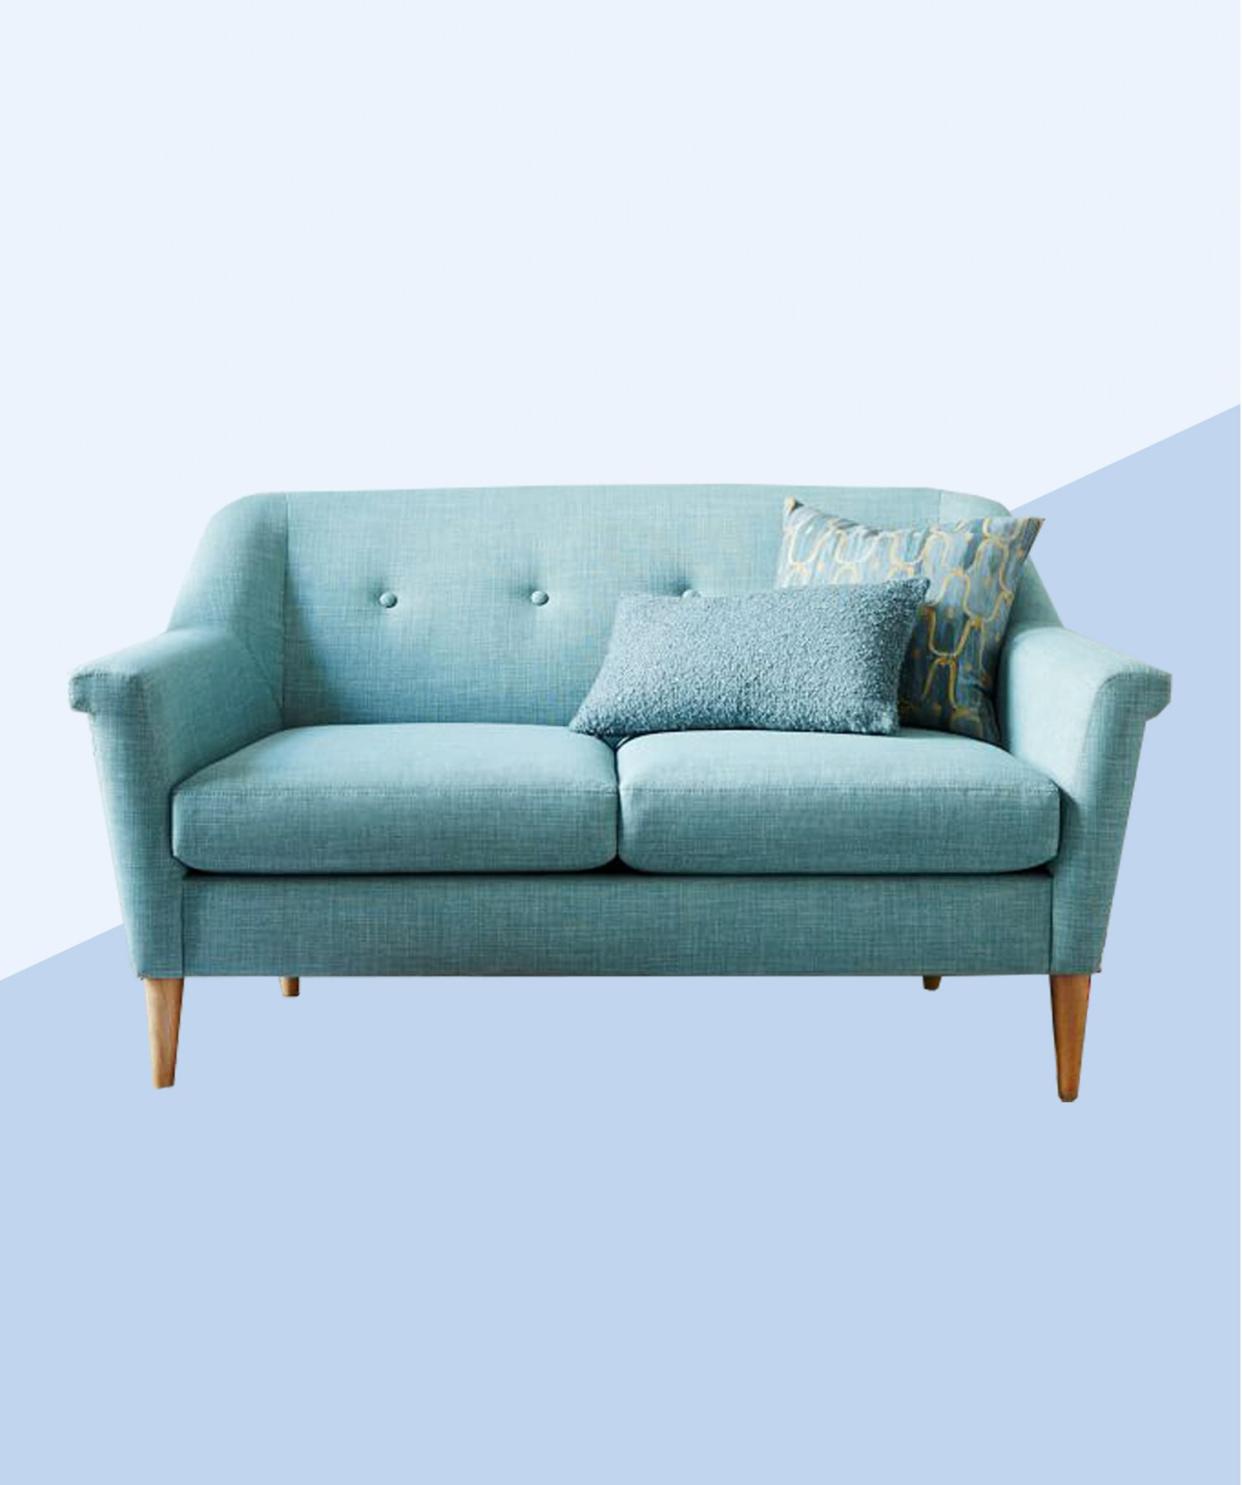 The Ultimate First Apartment Checklist West Elm sofa